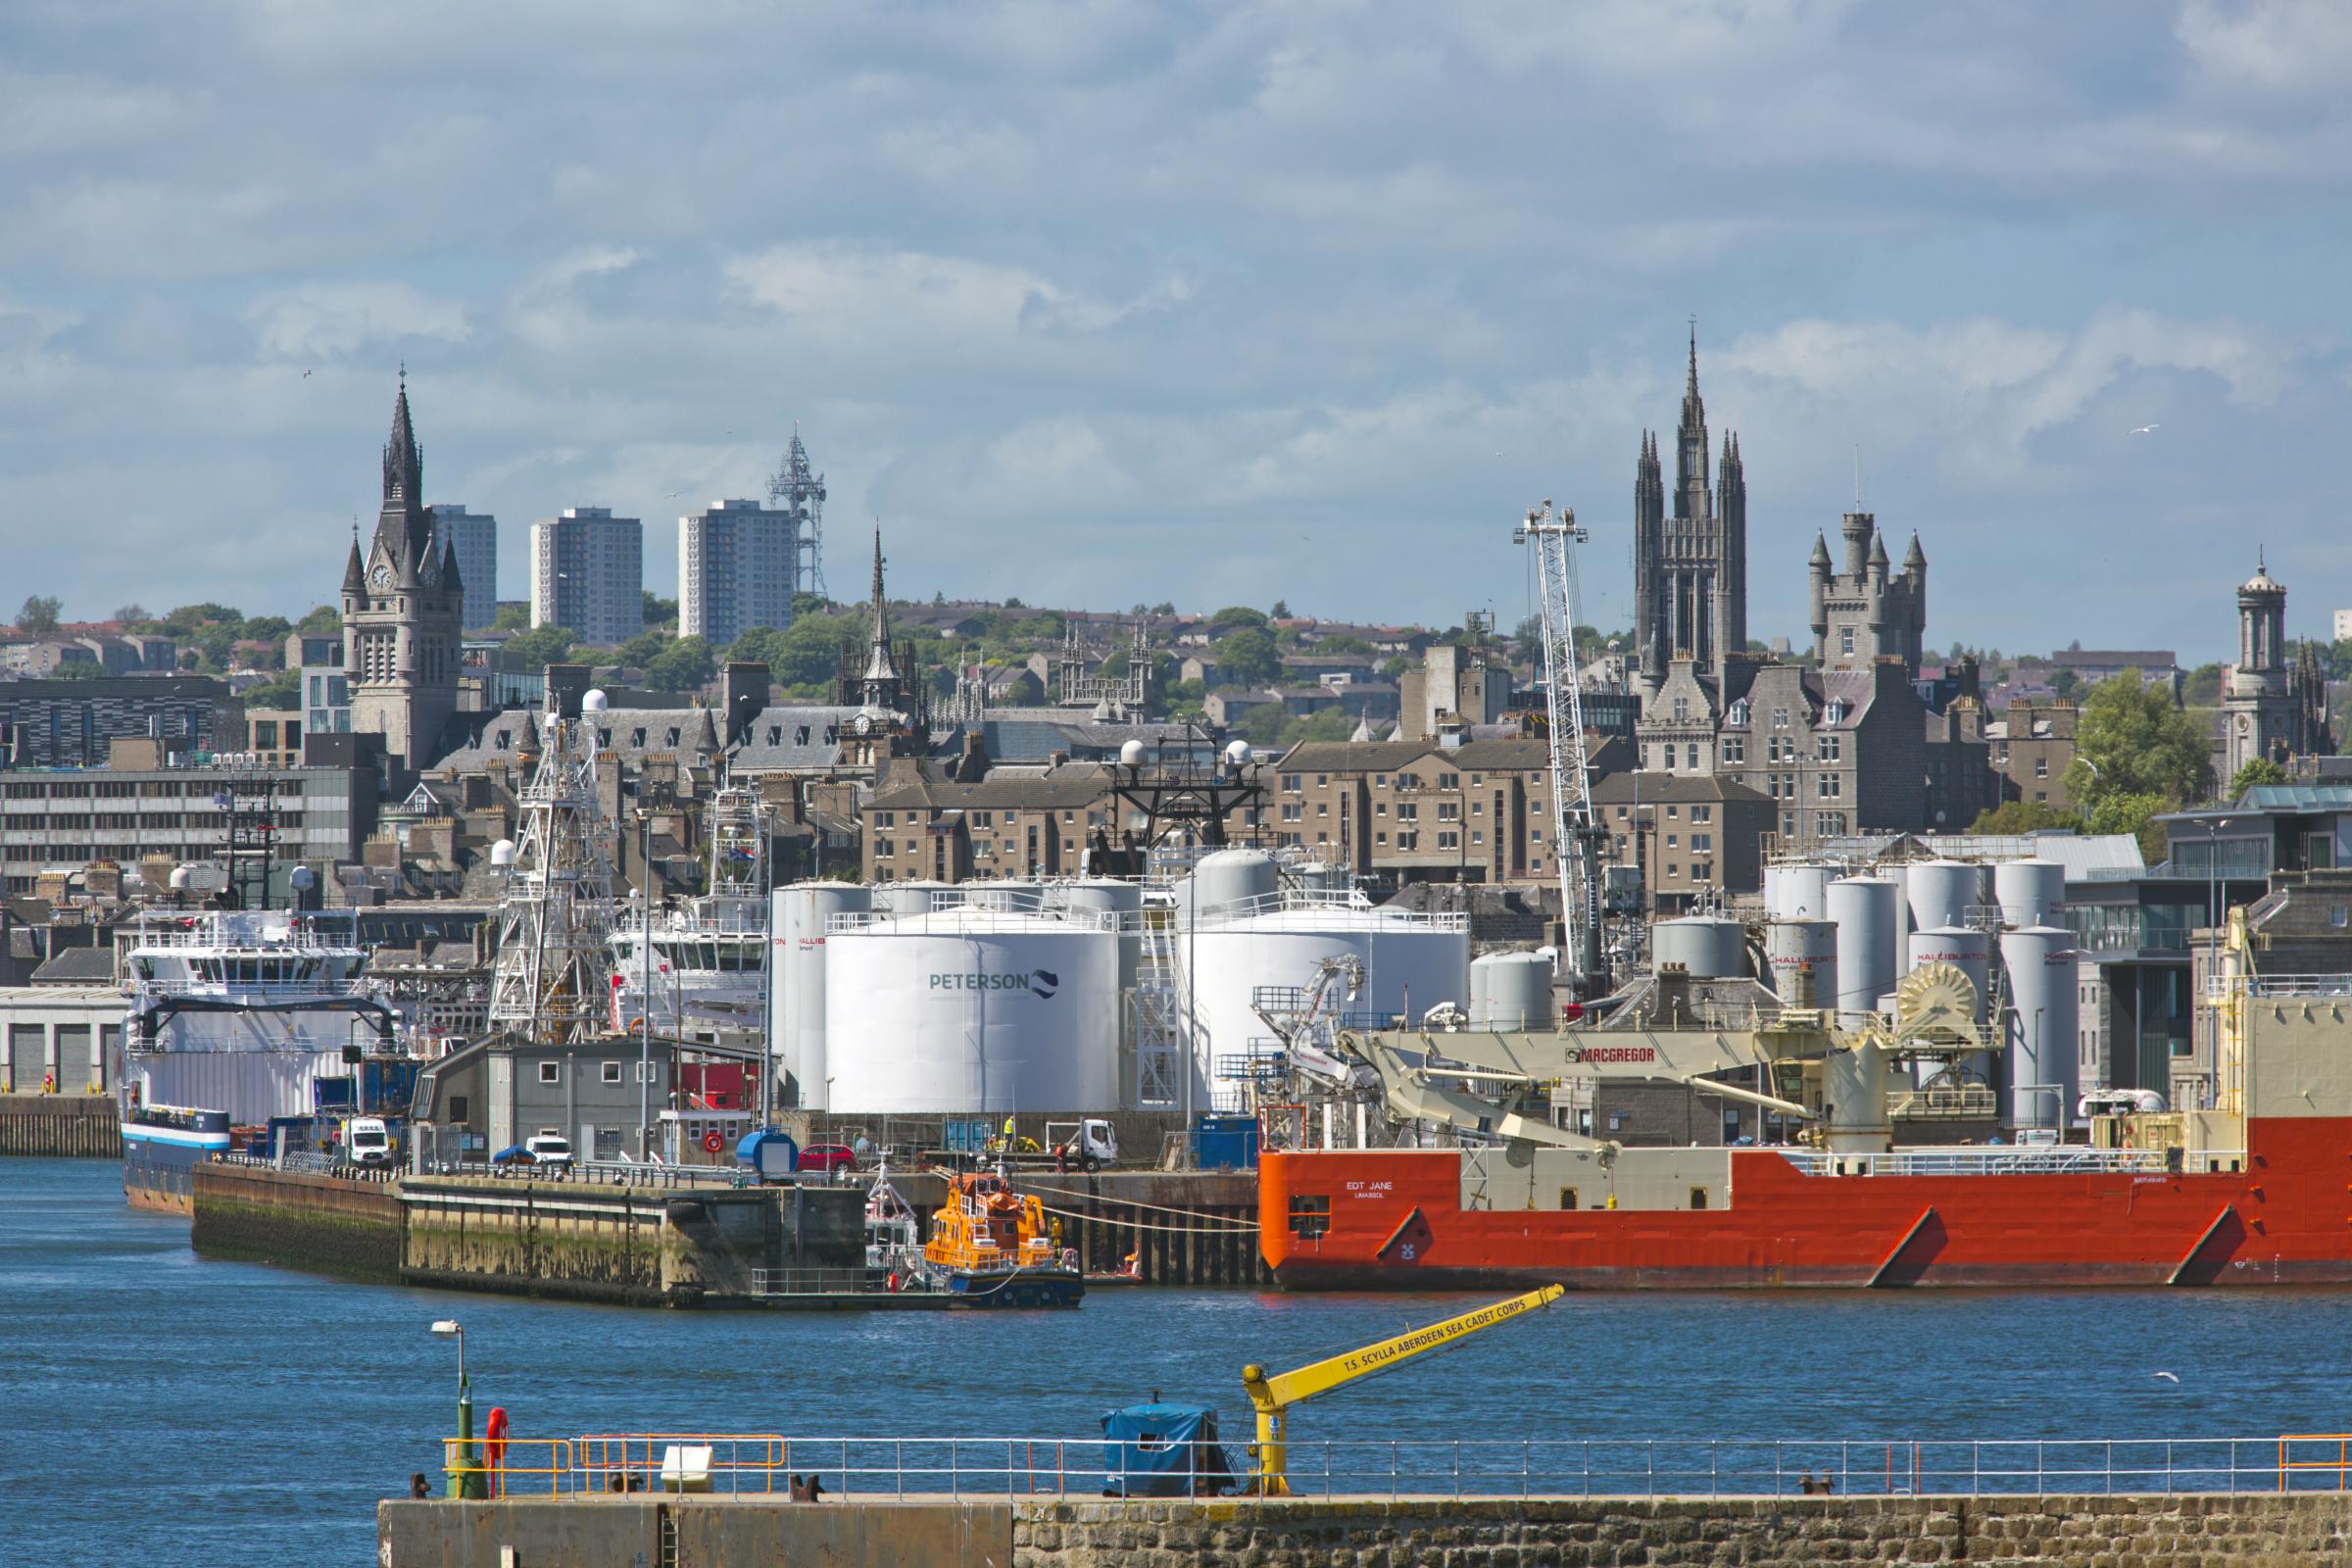 heraldscotland.com - Andrew Learmonth - It is a done deal:' Aberdeen will win GB Energy HQ, say industry sources